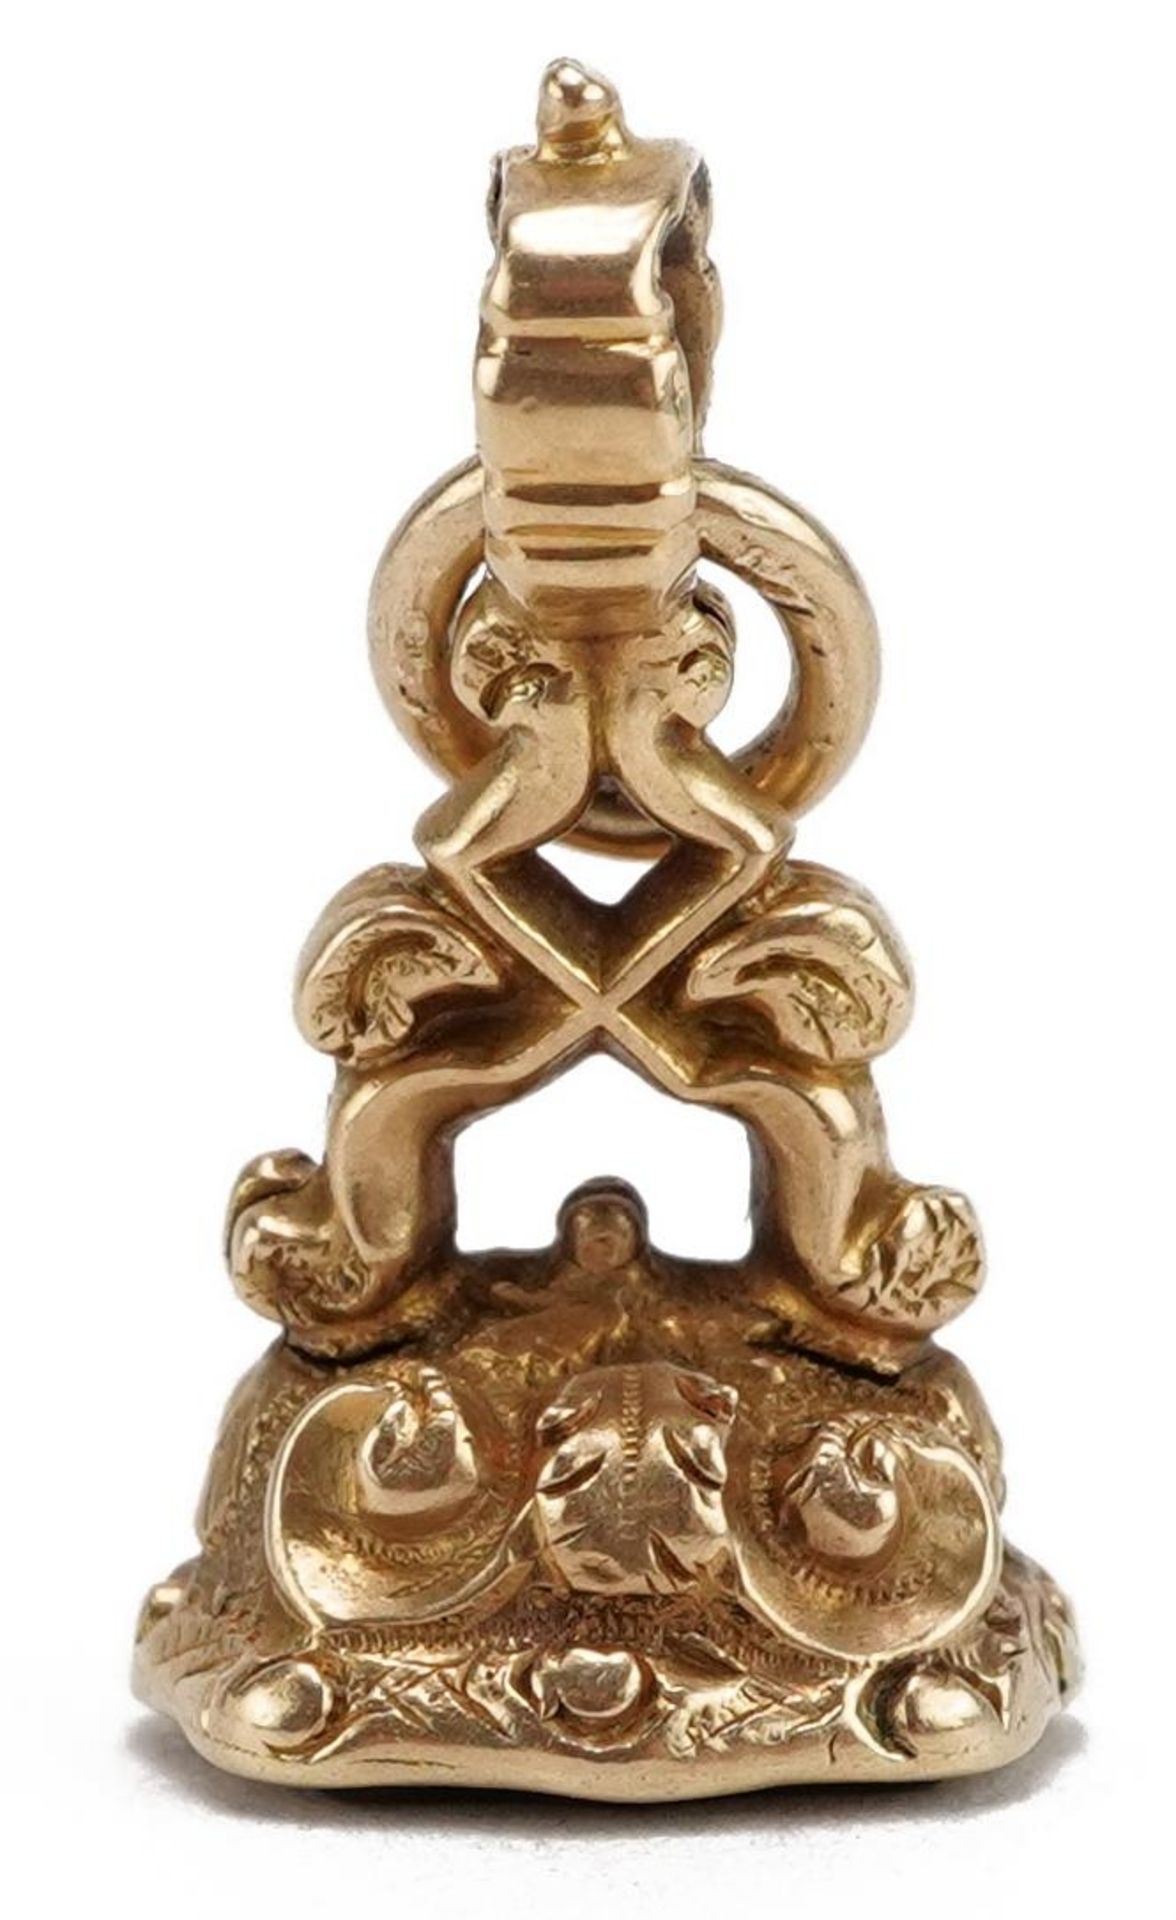 Unmarked gold hardstone seal fob charm, 1.9cm high, 1.7g : For further information on this lot